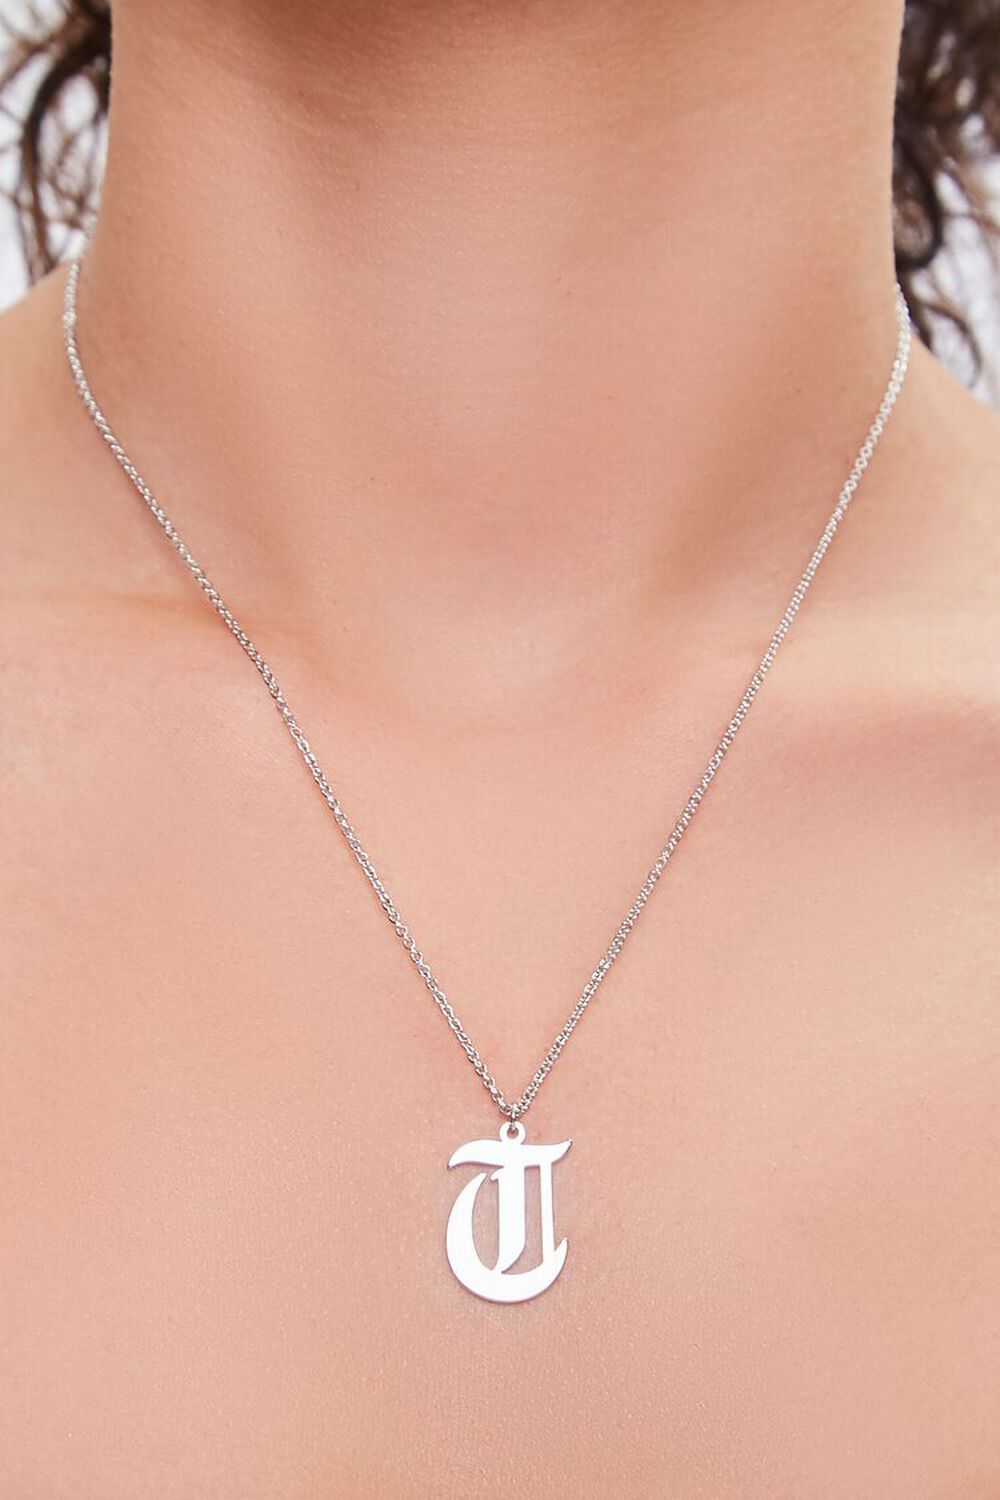 SILVER/T Initial Pendant Chain Necklace, image 1